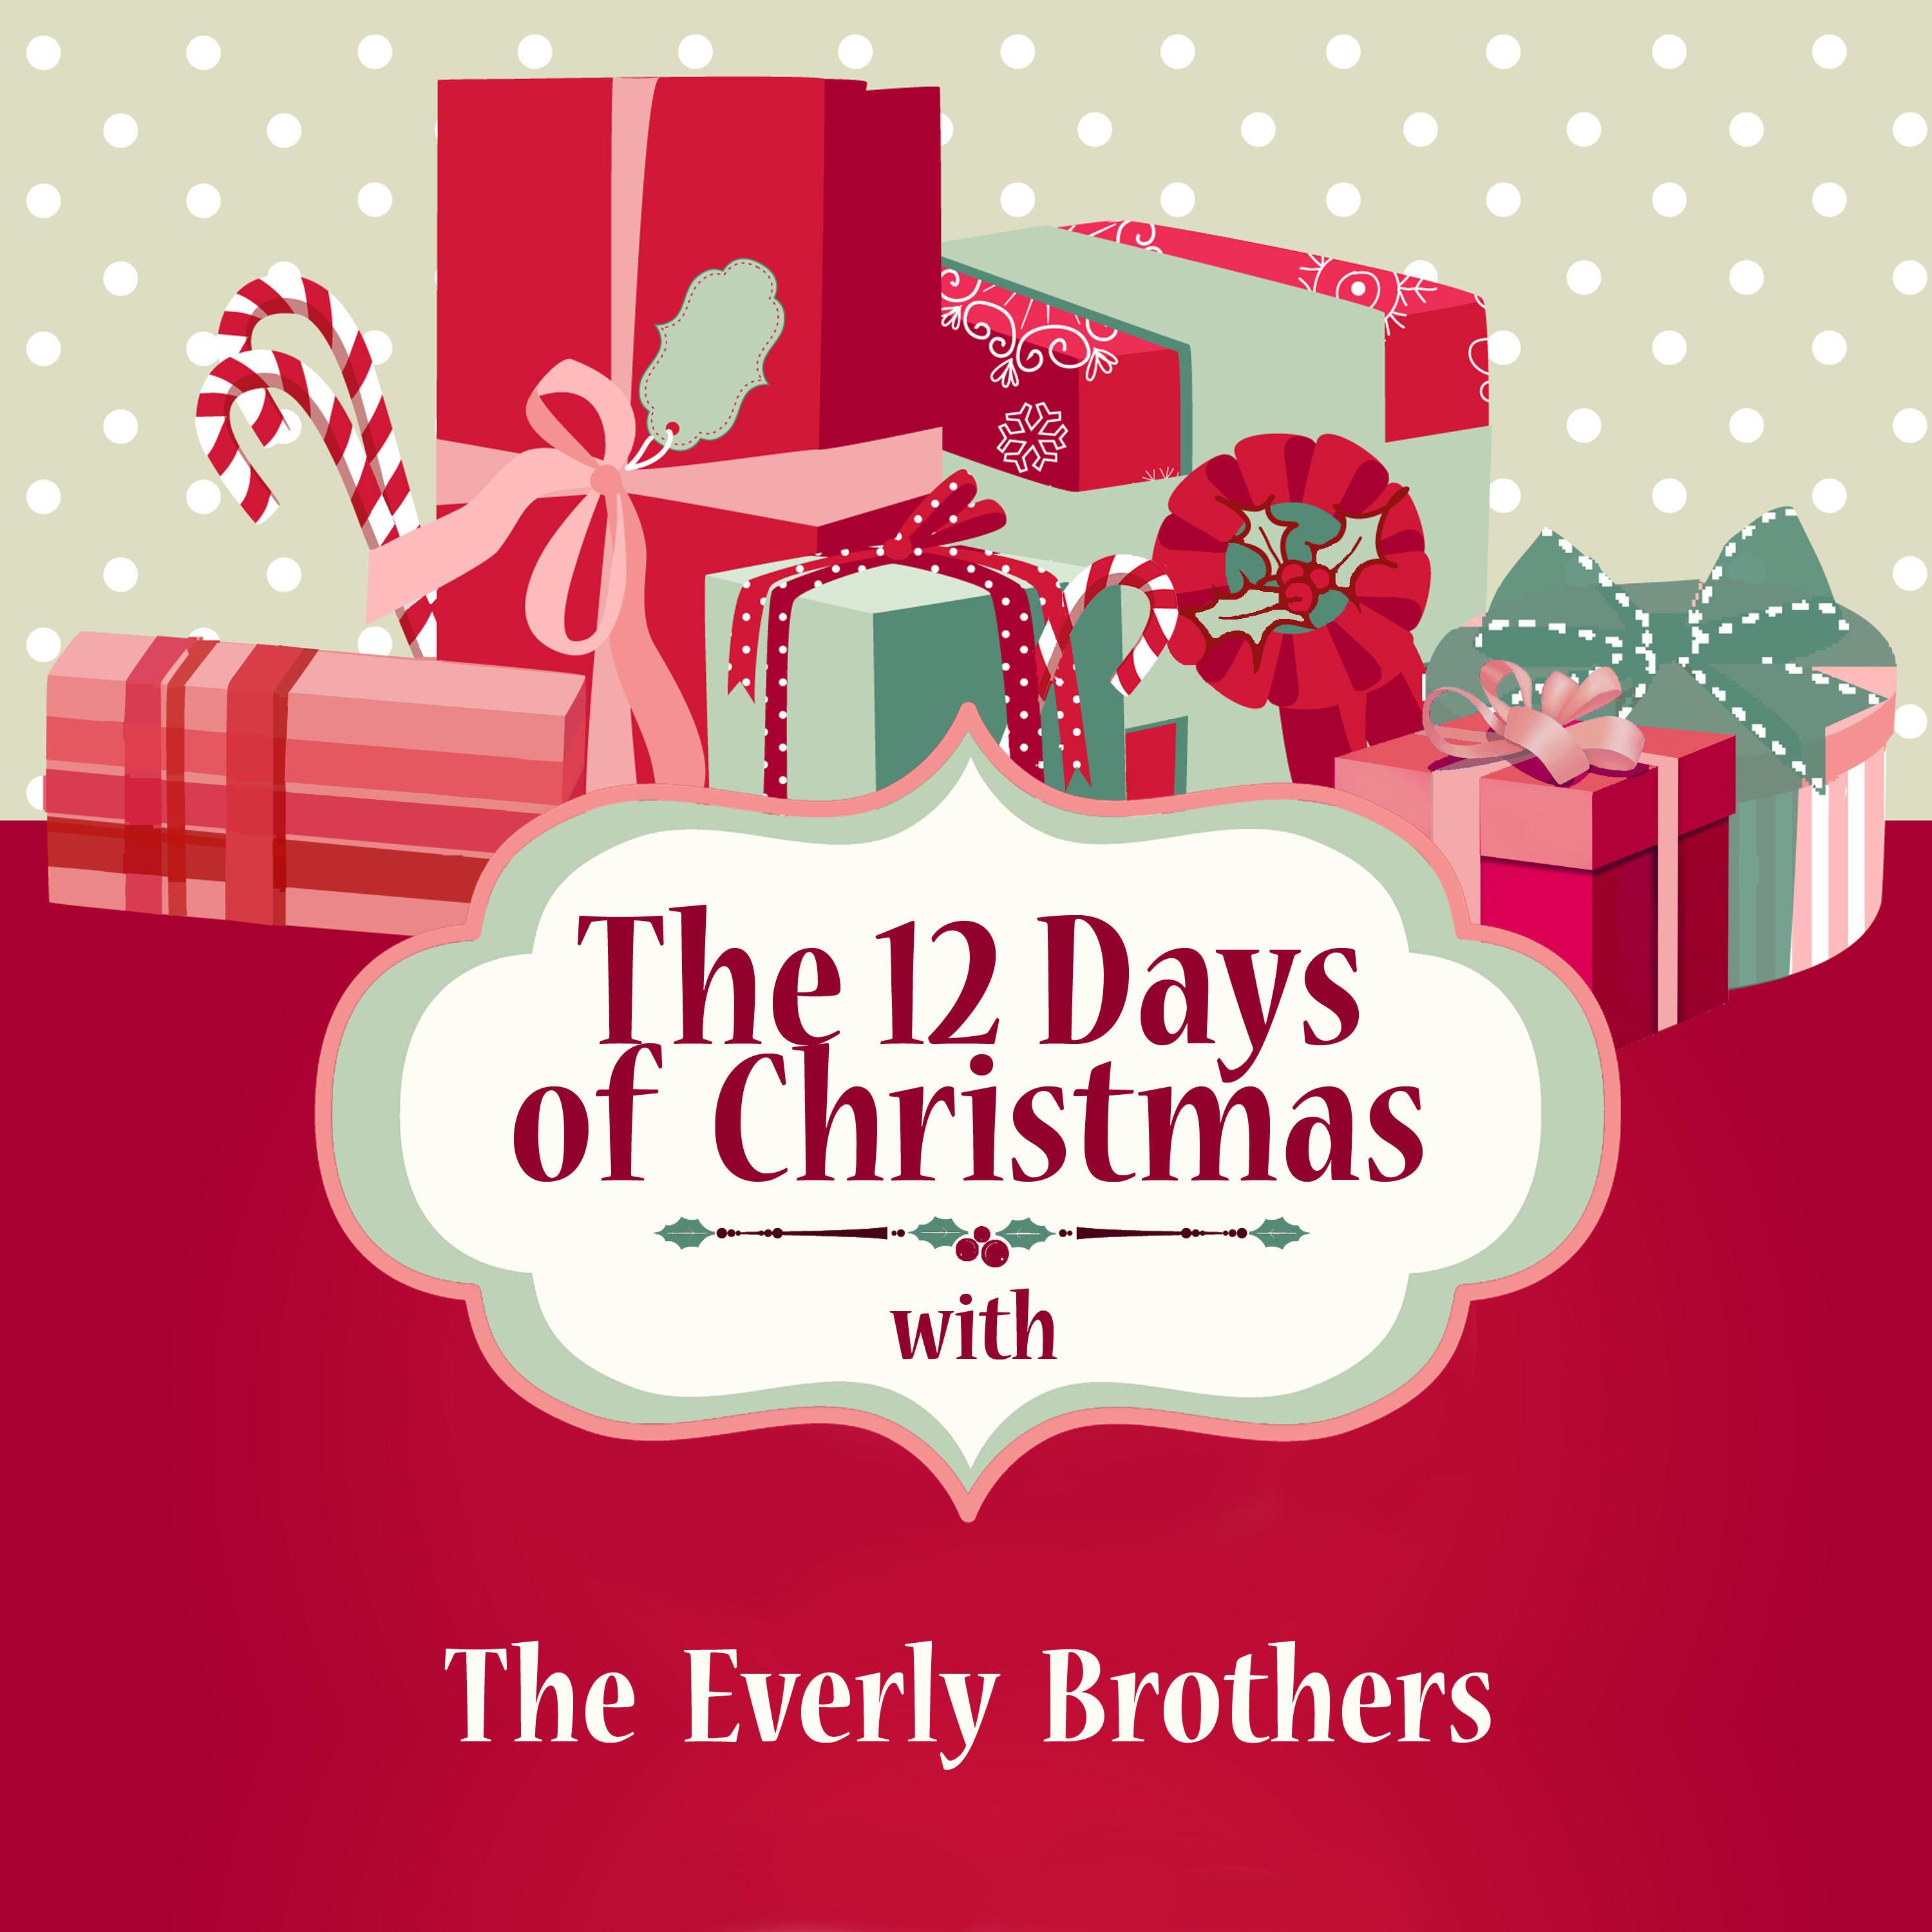 The 12 Days of Christmas with the Everly Brothers